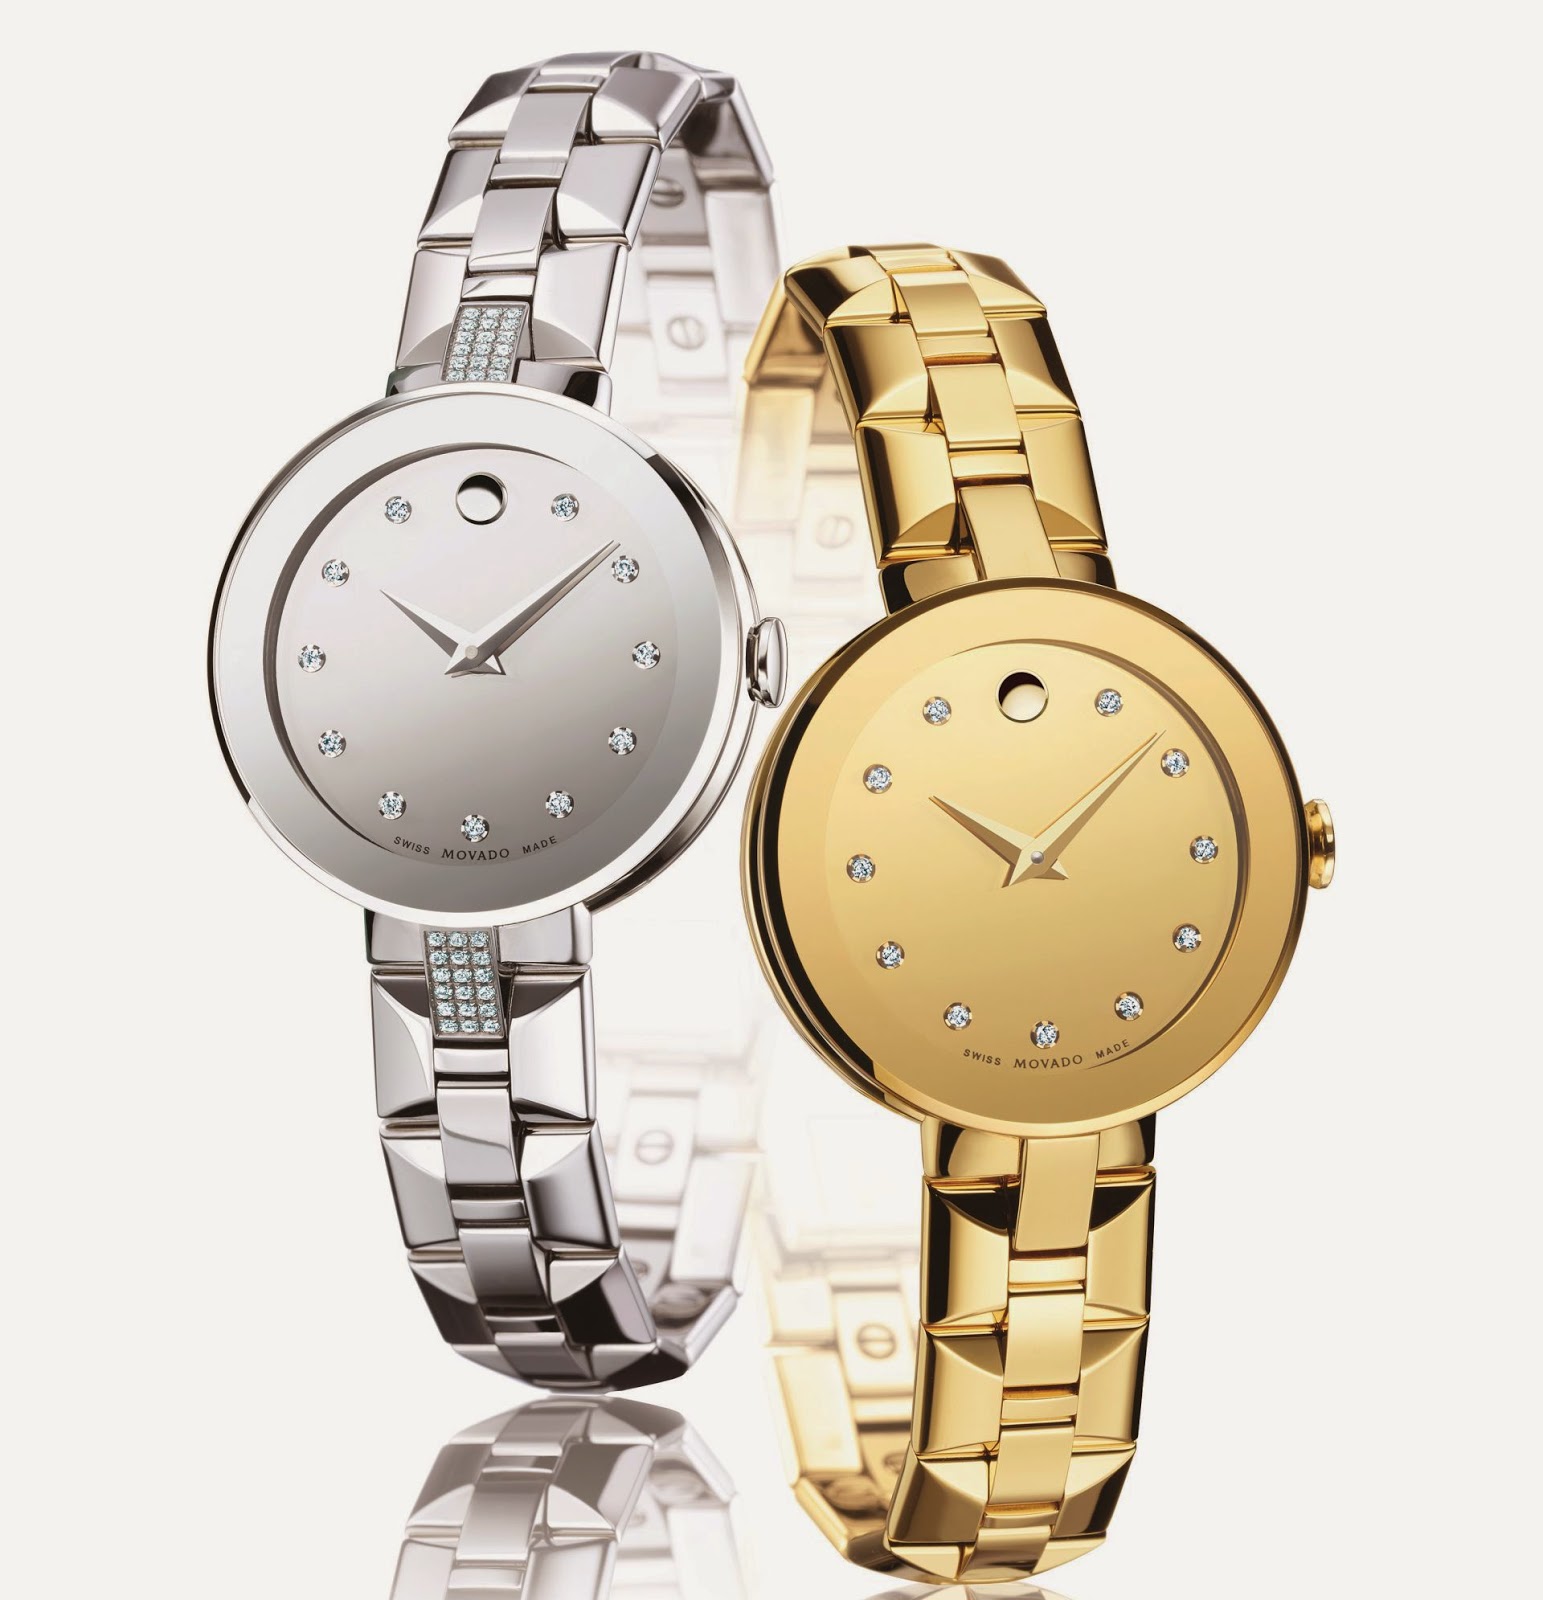 MOVADO SAPPHIRE™ Collection (New Ladies’ Models)